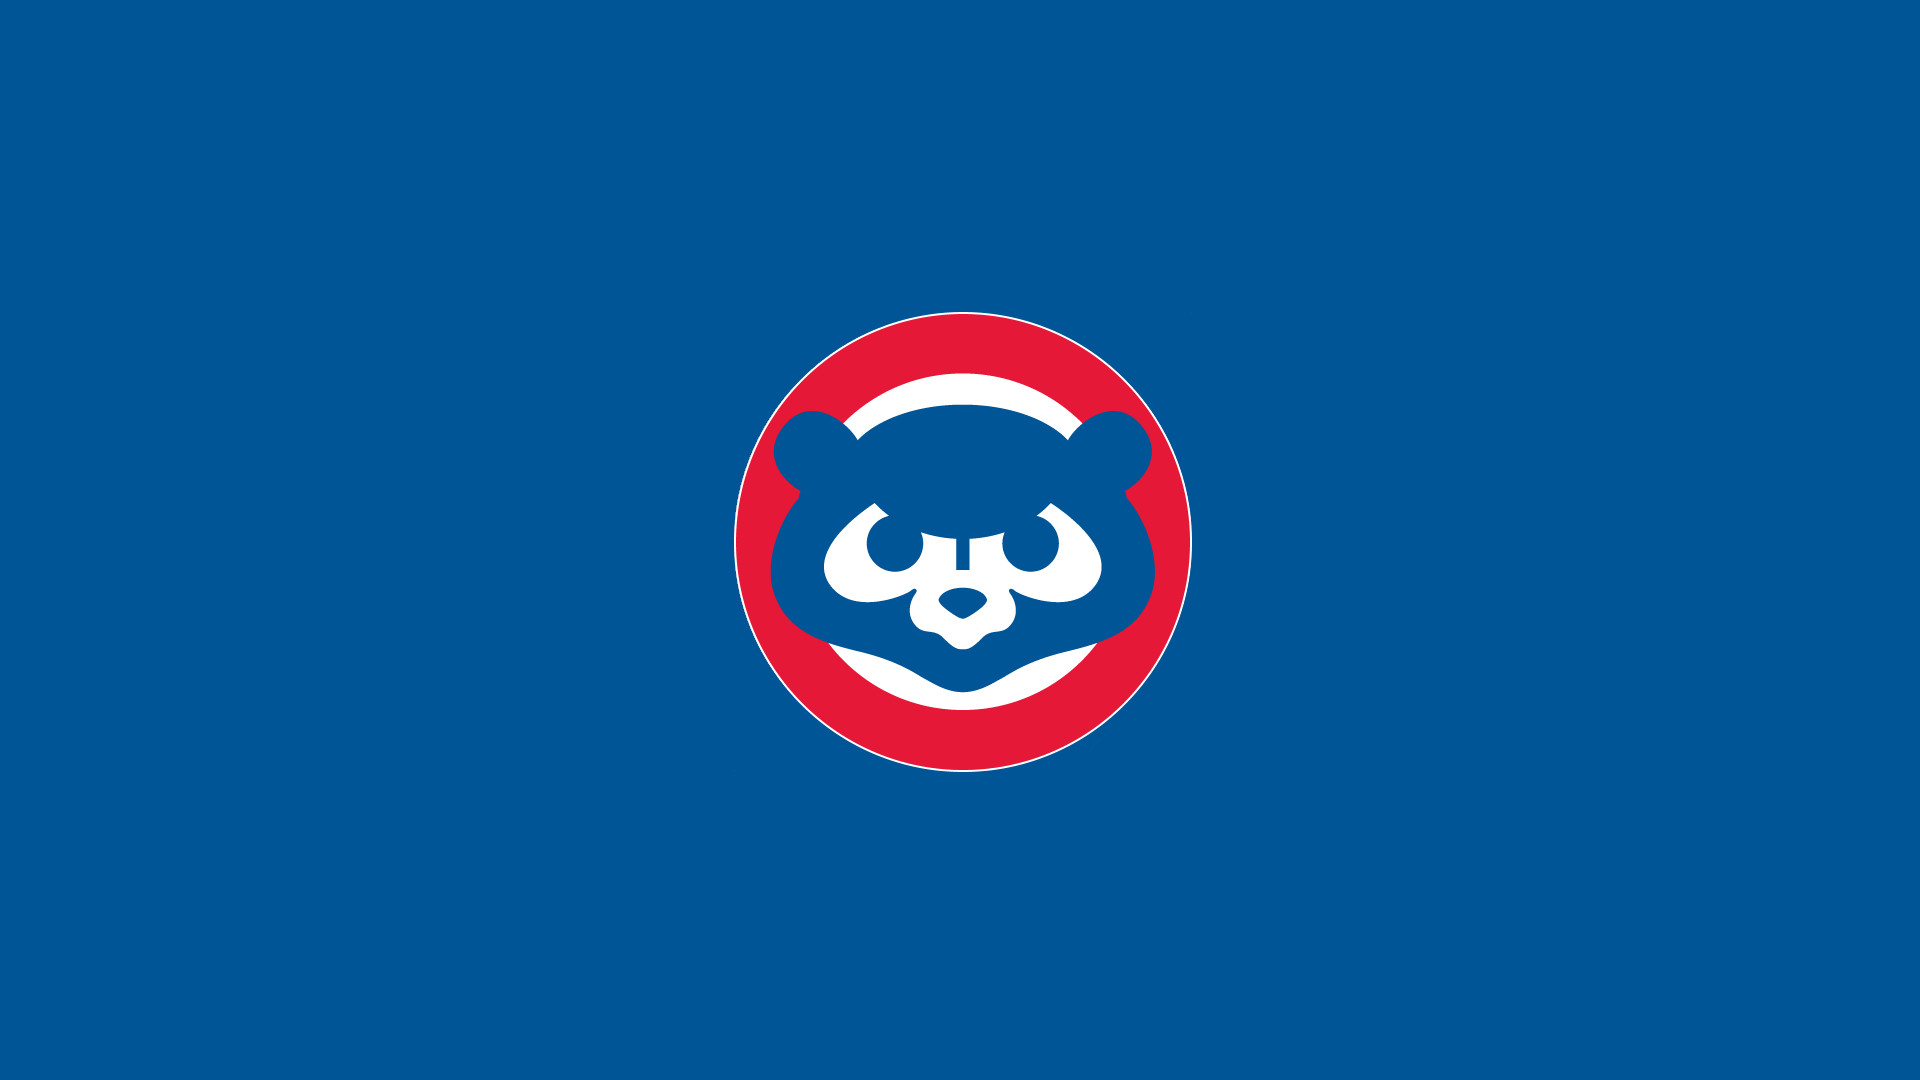 NMgnCP Chicago Cubs IPhone, by Erlene Tarr